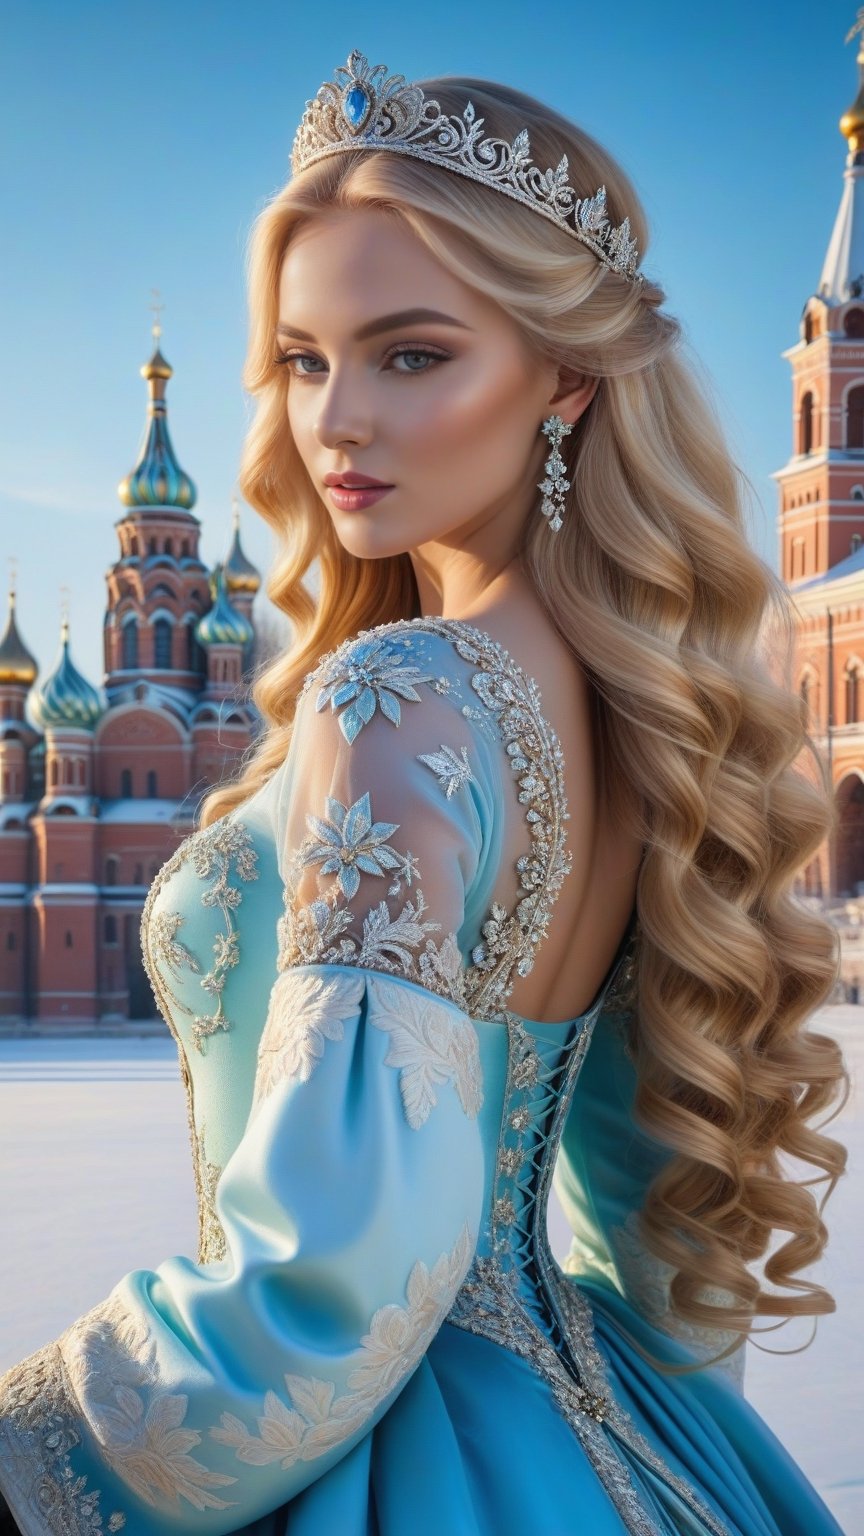 best quality, masterpiece,	
Amidst the winter wonderland of Russia, a beautiful girl with very long wavy blonde hair stands out against the snow-covered landscape, embodying the elegance of Rococo style. Her attire, a harmonious blend of the latest fashion trends and traditional Russian elements, dazzles with ornate jewelry that sparkles like the icy terrain around her. This enchanting scene, set against the backdrop of a quintessential Russian setting, showcases her as a modern-day princess, bridging the gap between the opulence of the past and the chic style of the present.
ultra realistic illustration, siena natural ratio, ultra hd, realistic, vivid colors, highly detailed, UHD drawing, perfect composition, ultra hd, 8k, he has an inner glow, stunning, something that even doesn't exist, mythical being, energy, molecular, textures, iridescent and luminescent scales, breathtaking beauty, pure perfection, divine presence, unforgettable, impressive, breathtaking beauty, Volumetric light, auras, rays, vivid colors reflects.